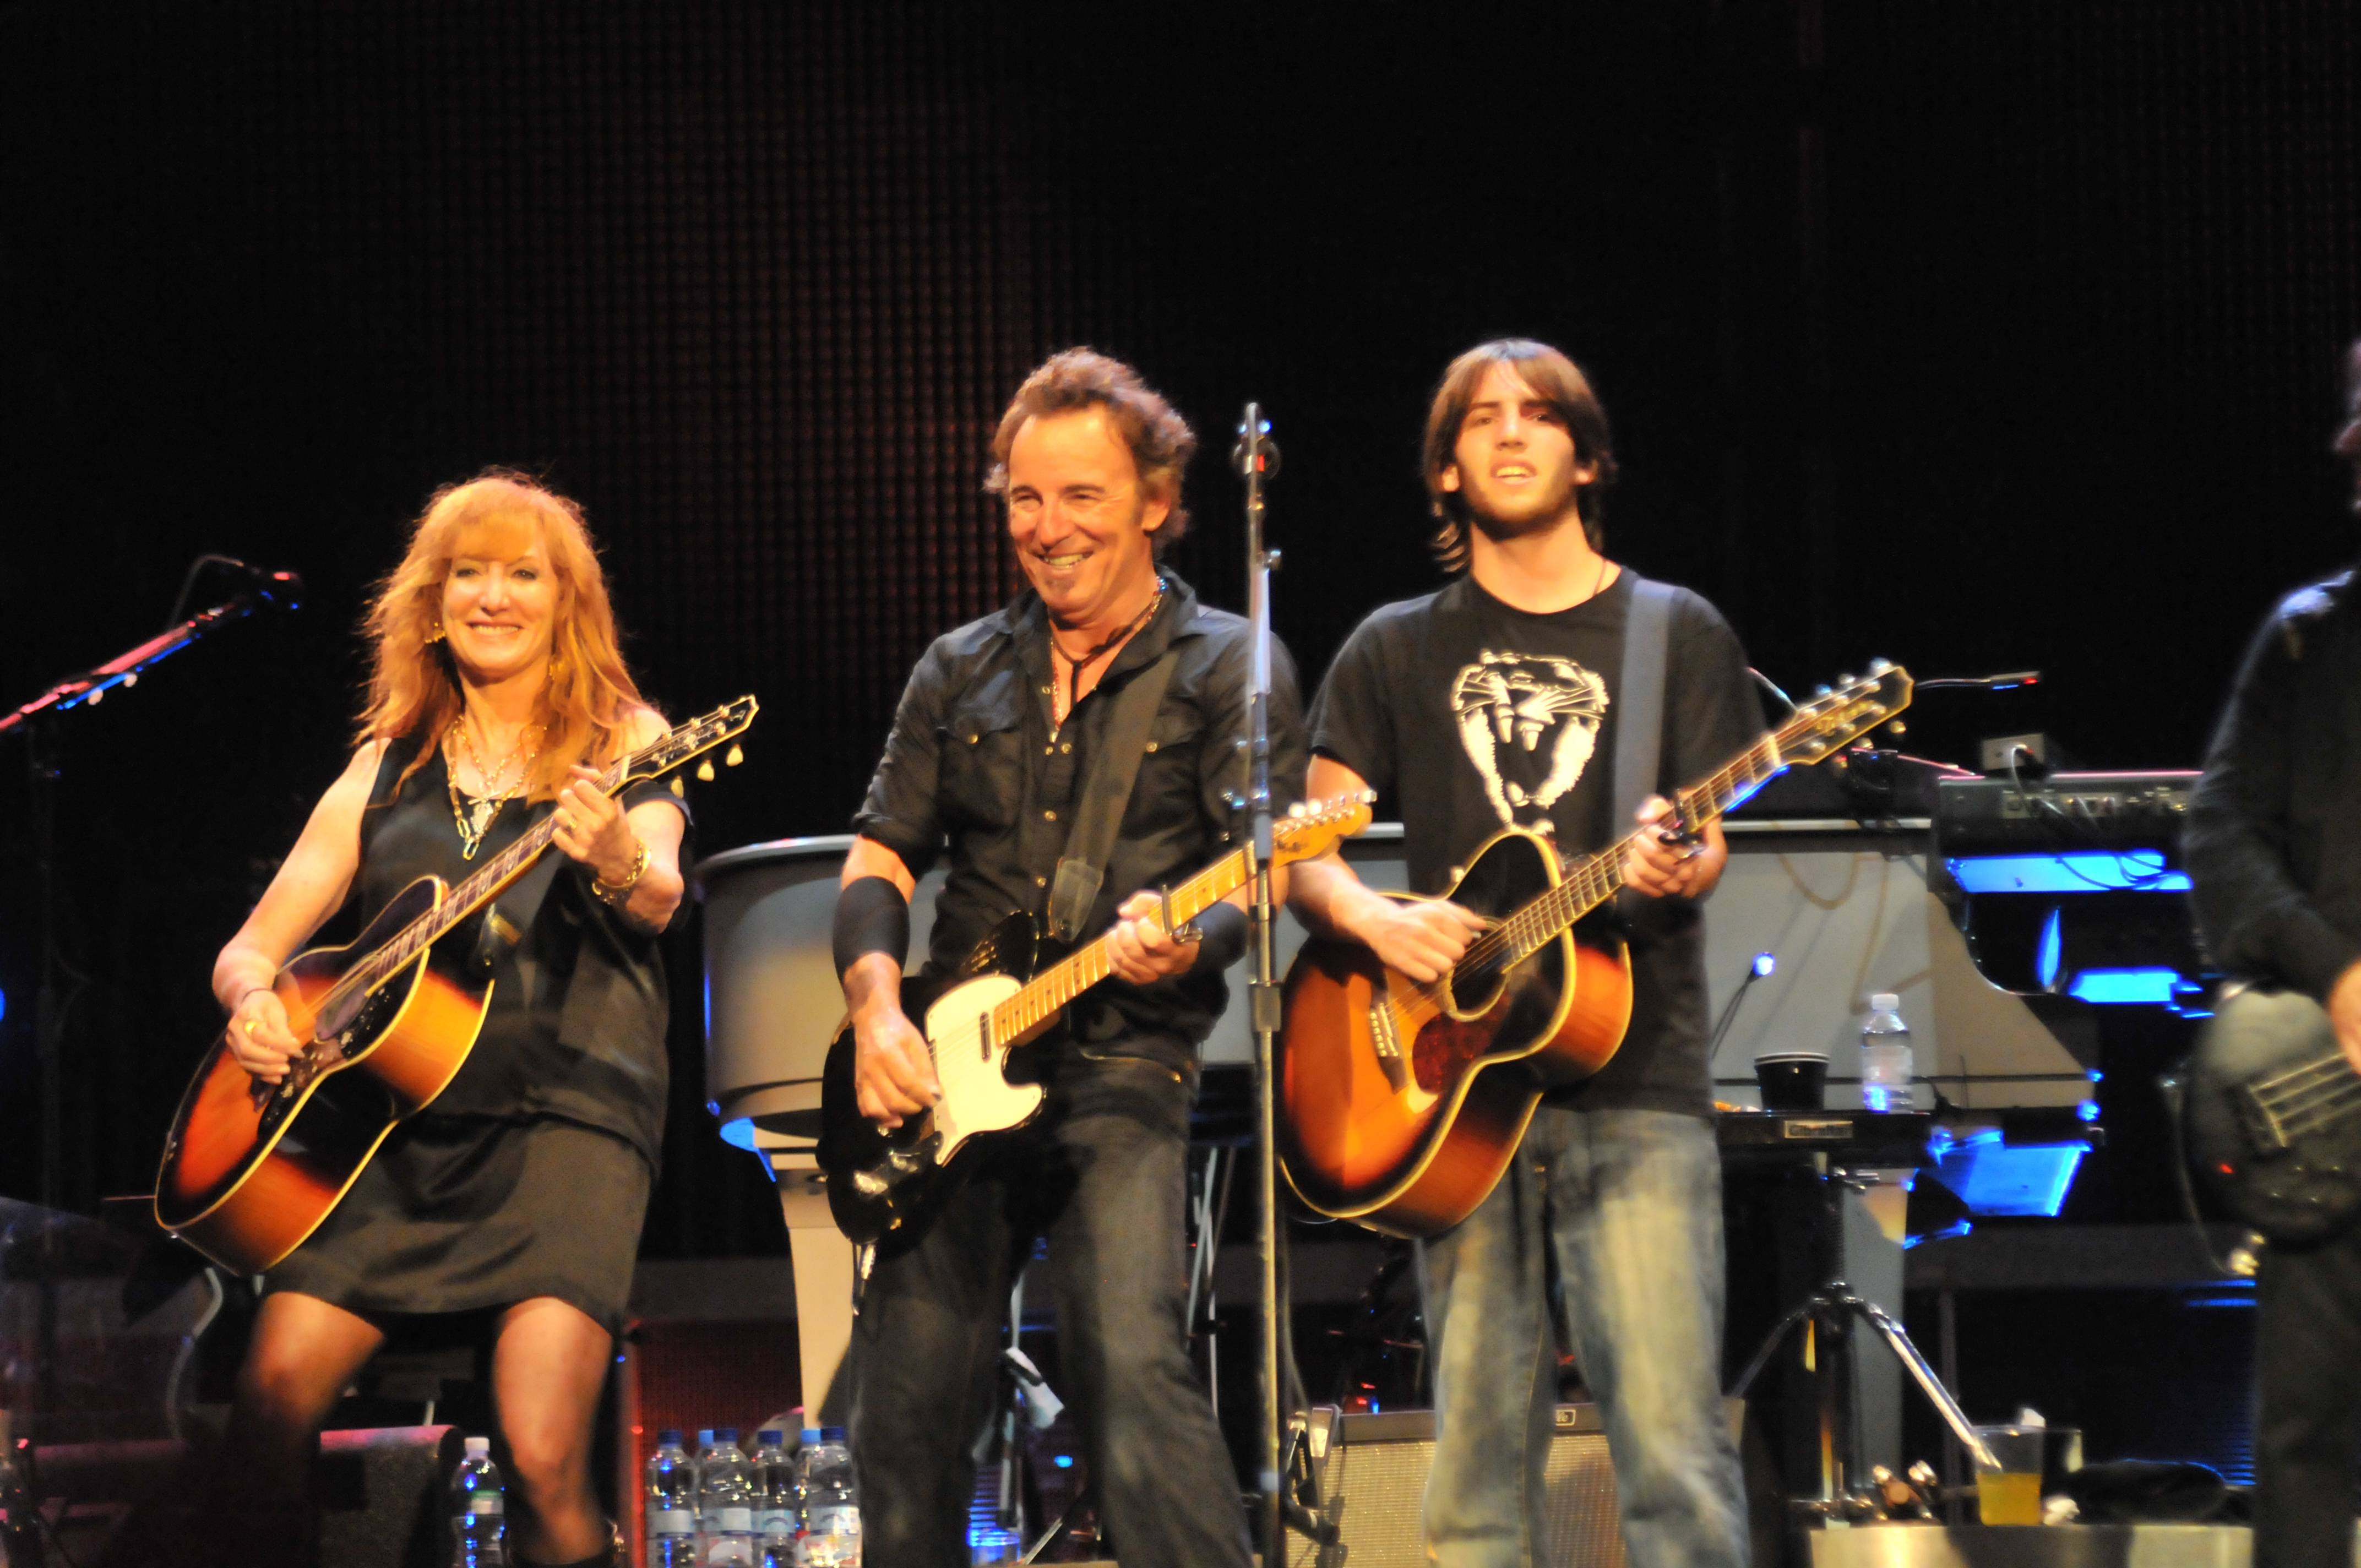 Patti Scialfa, Bruce Springsteen and their son Evan Springsteen performing live onstage in July 2008. | Source: Getty Images